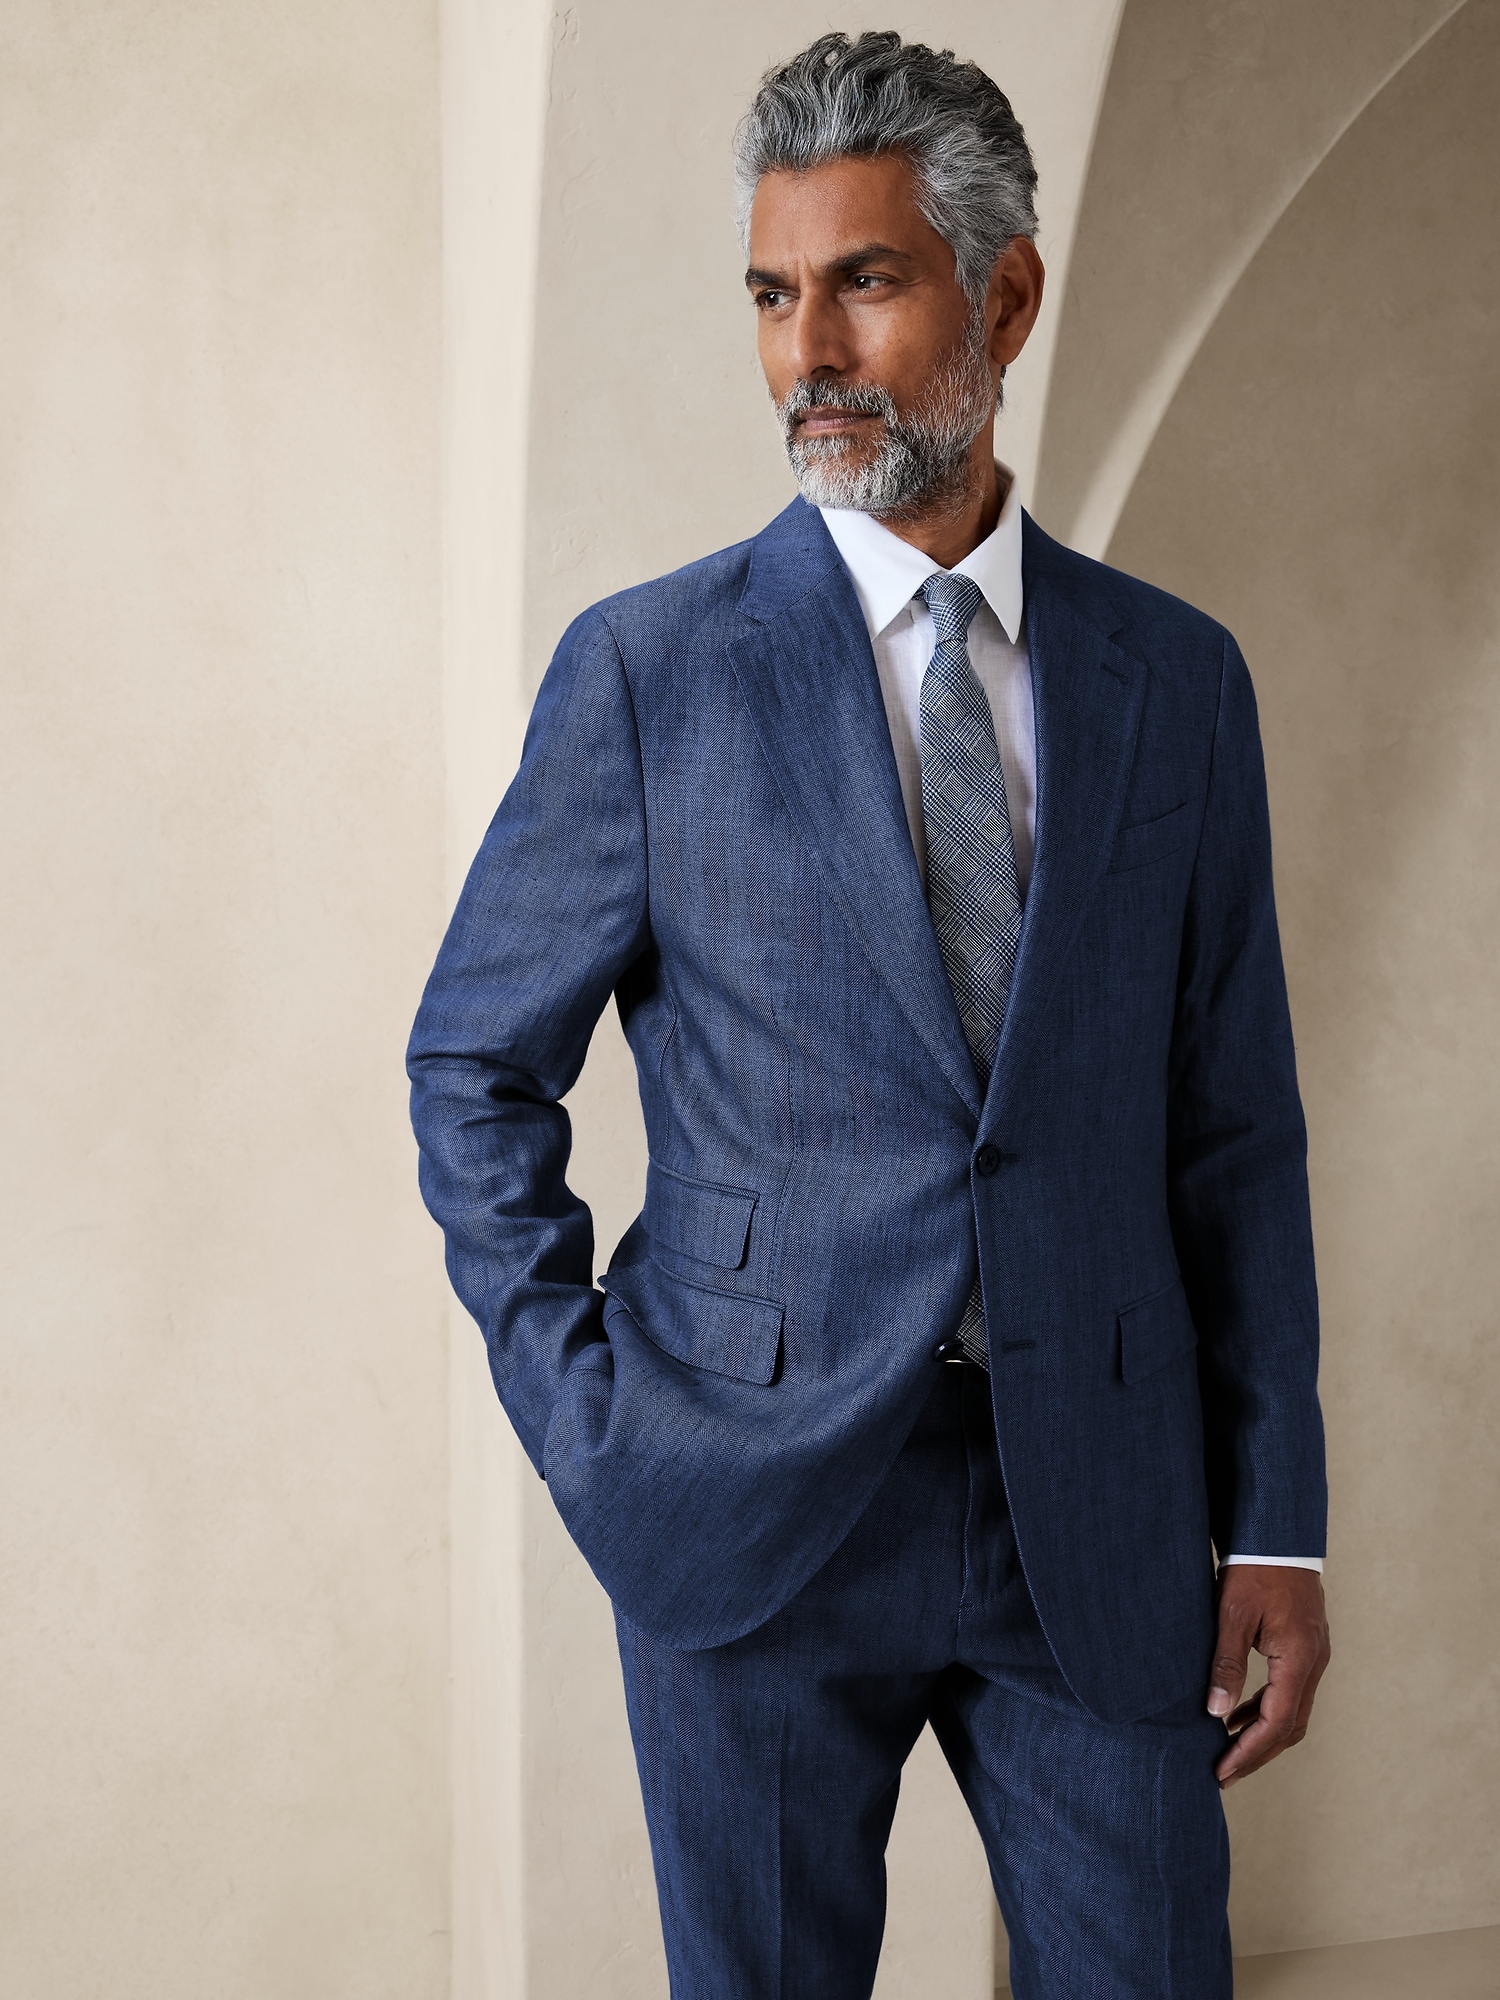 Easter suits for men provide a perfect opportunity to showcase style and sophistication during the holiday season.